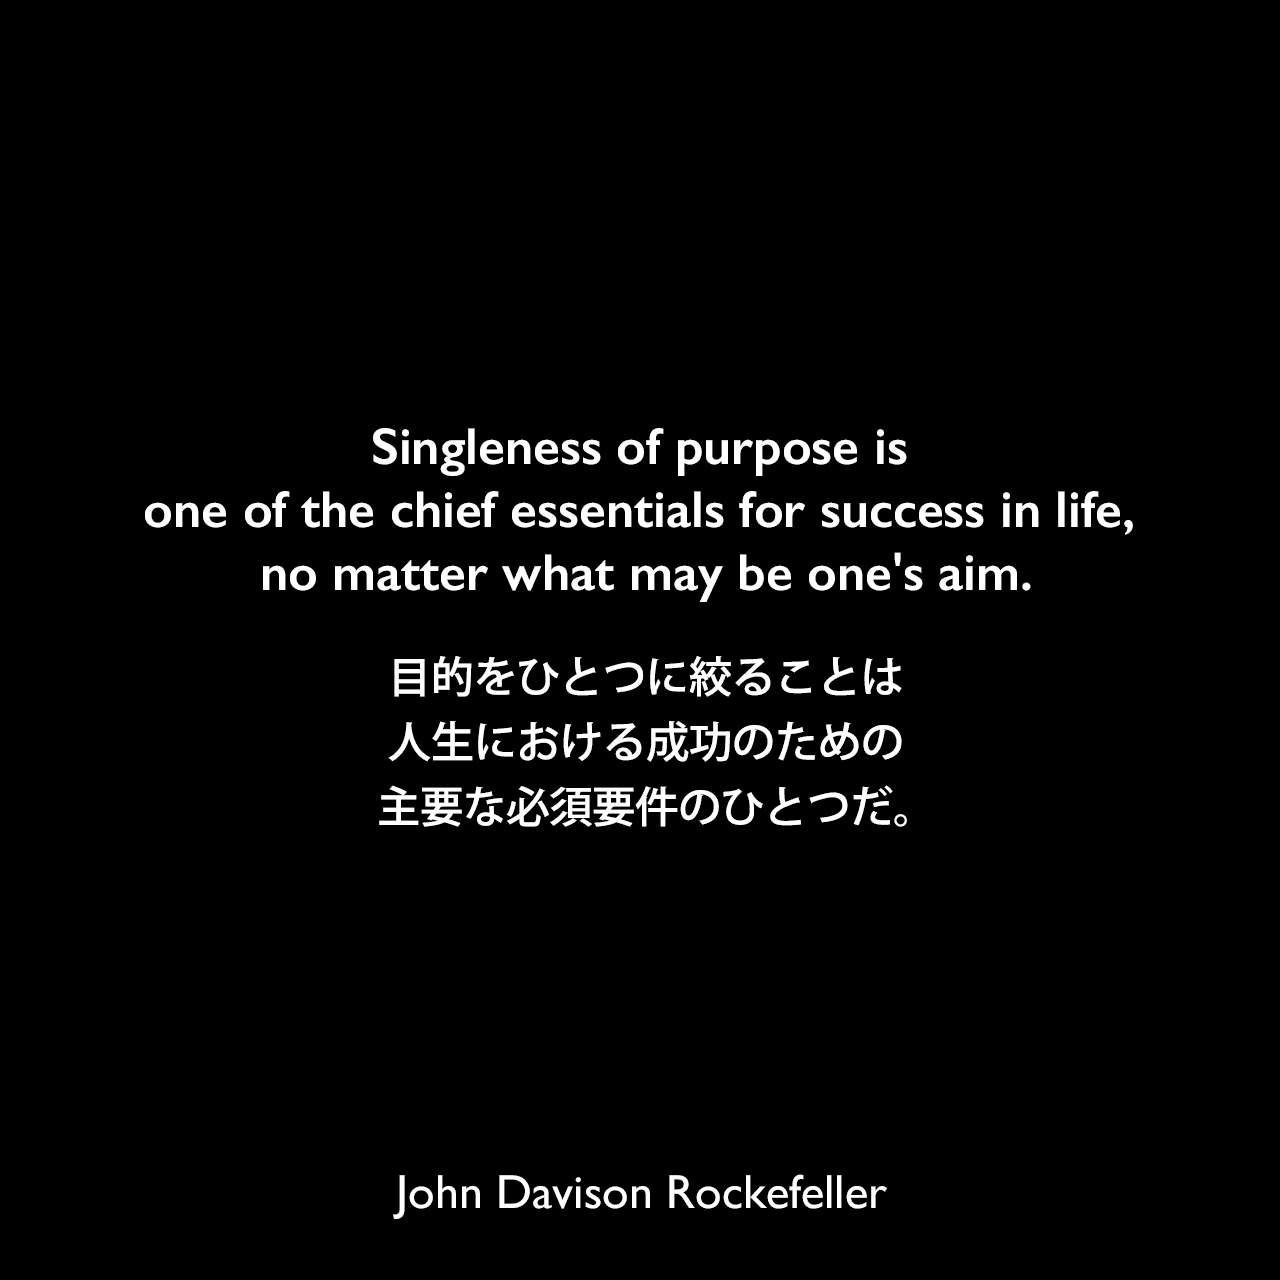 Singleness of purpose is one of the chief essentials for success in life, no matter what may be one's aim.目的をひとつに絞ることは人生における成功のための主要な必須要件のひとつだ。John Davison Rockefeller